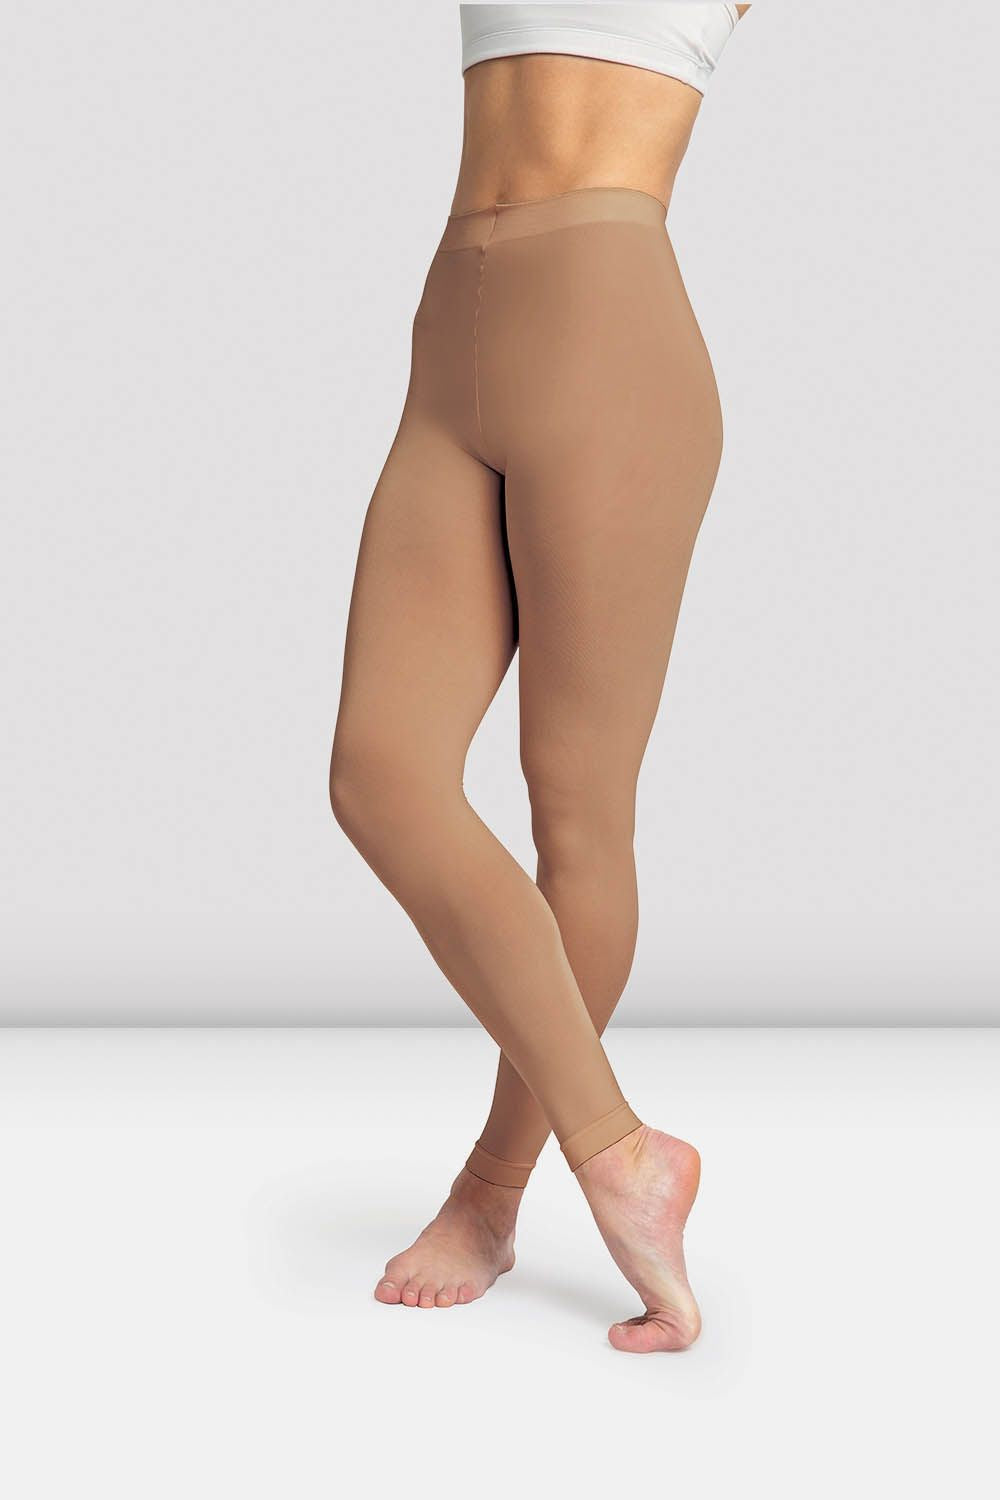 FOOTLESS TIGHTS WOMEN - Boutique of Dance